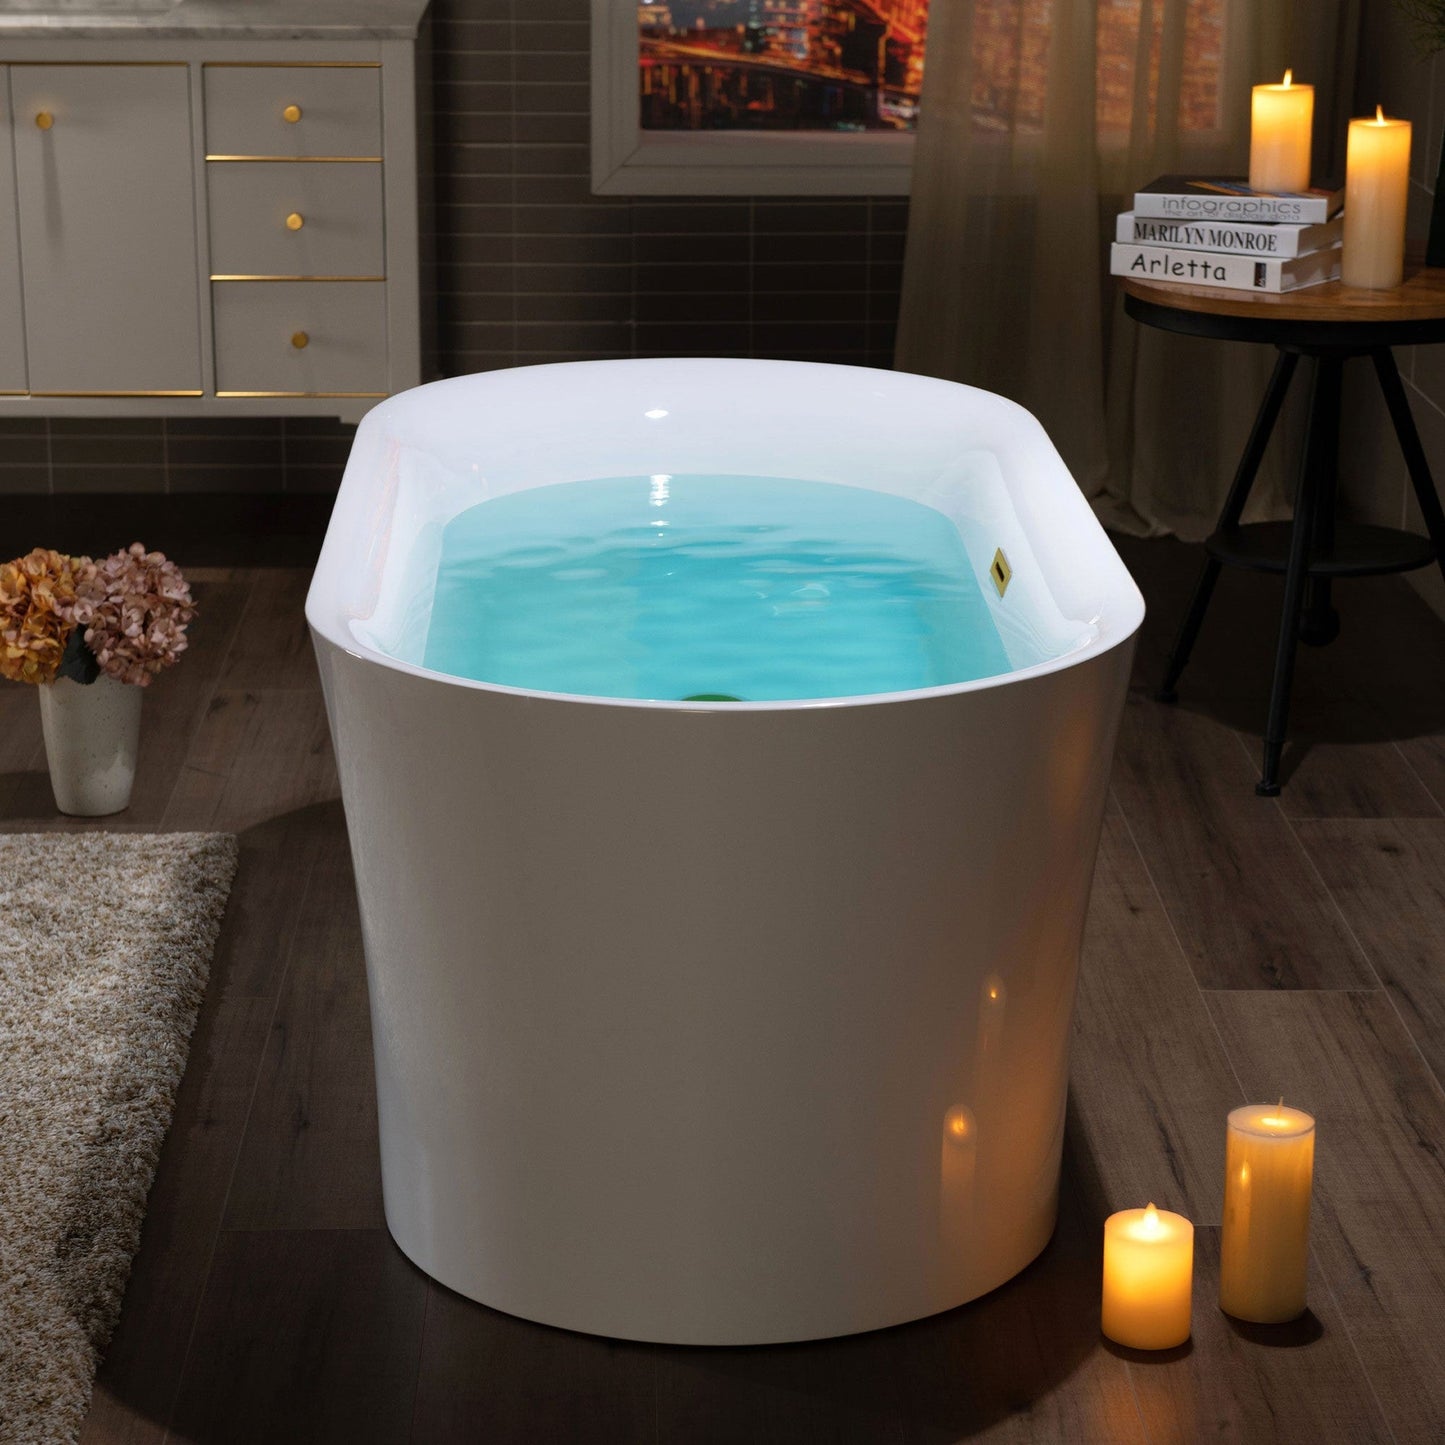 WoodBridge B0057 67" White Acrylic Freestanding Contemporary Soaking Bathtub With Brushed Gold Overflow and Drain